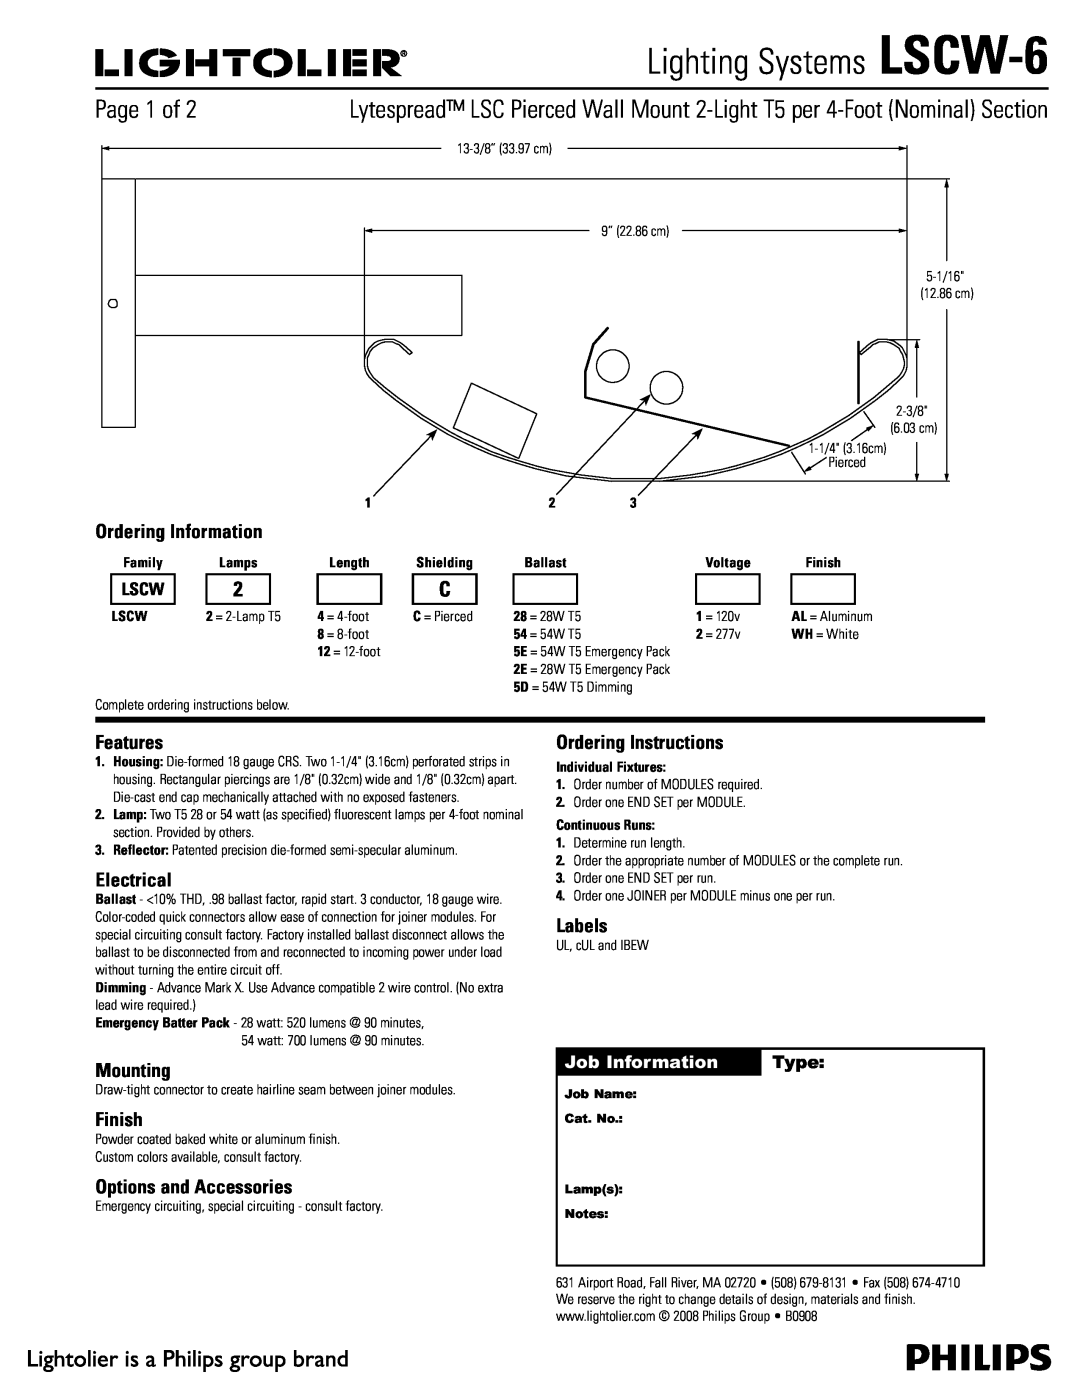 Lightolier LSCW-6 manual Ordering Information, Features, Electrical, Mounting, Finish, Options and Accessories, Labels 